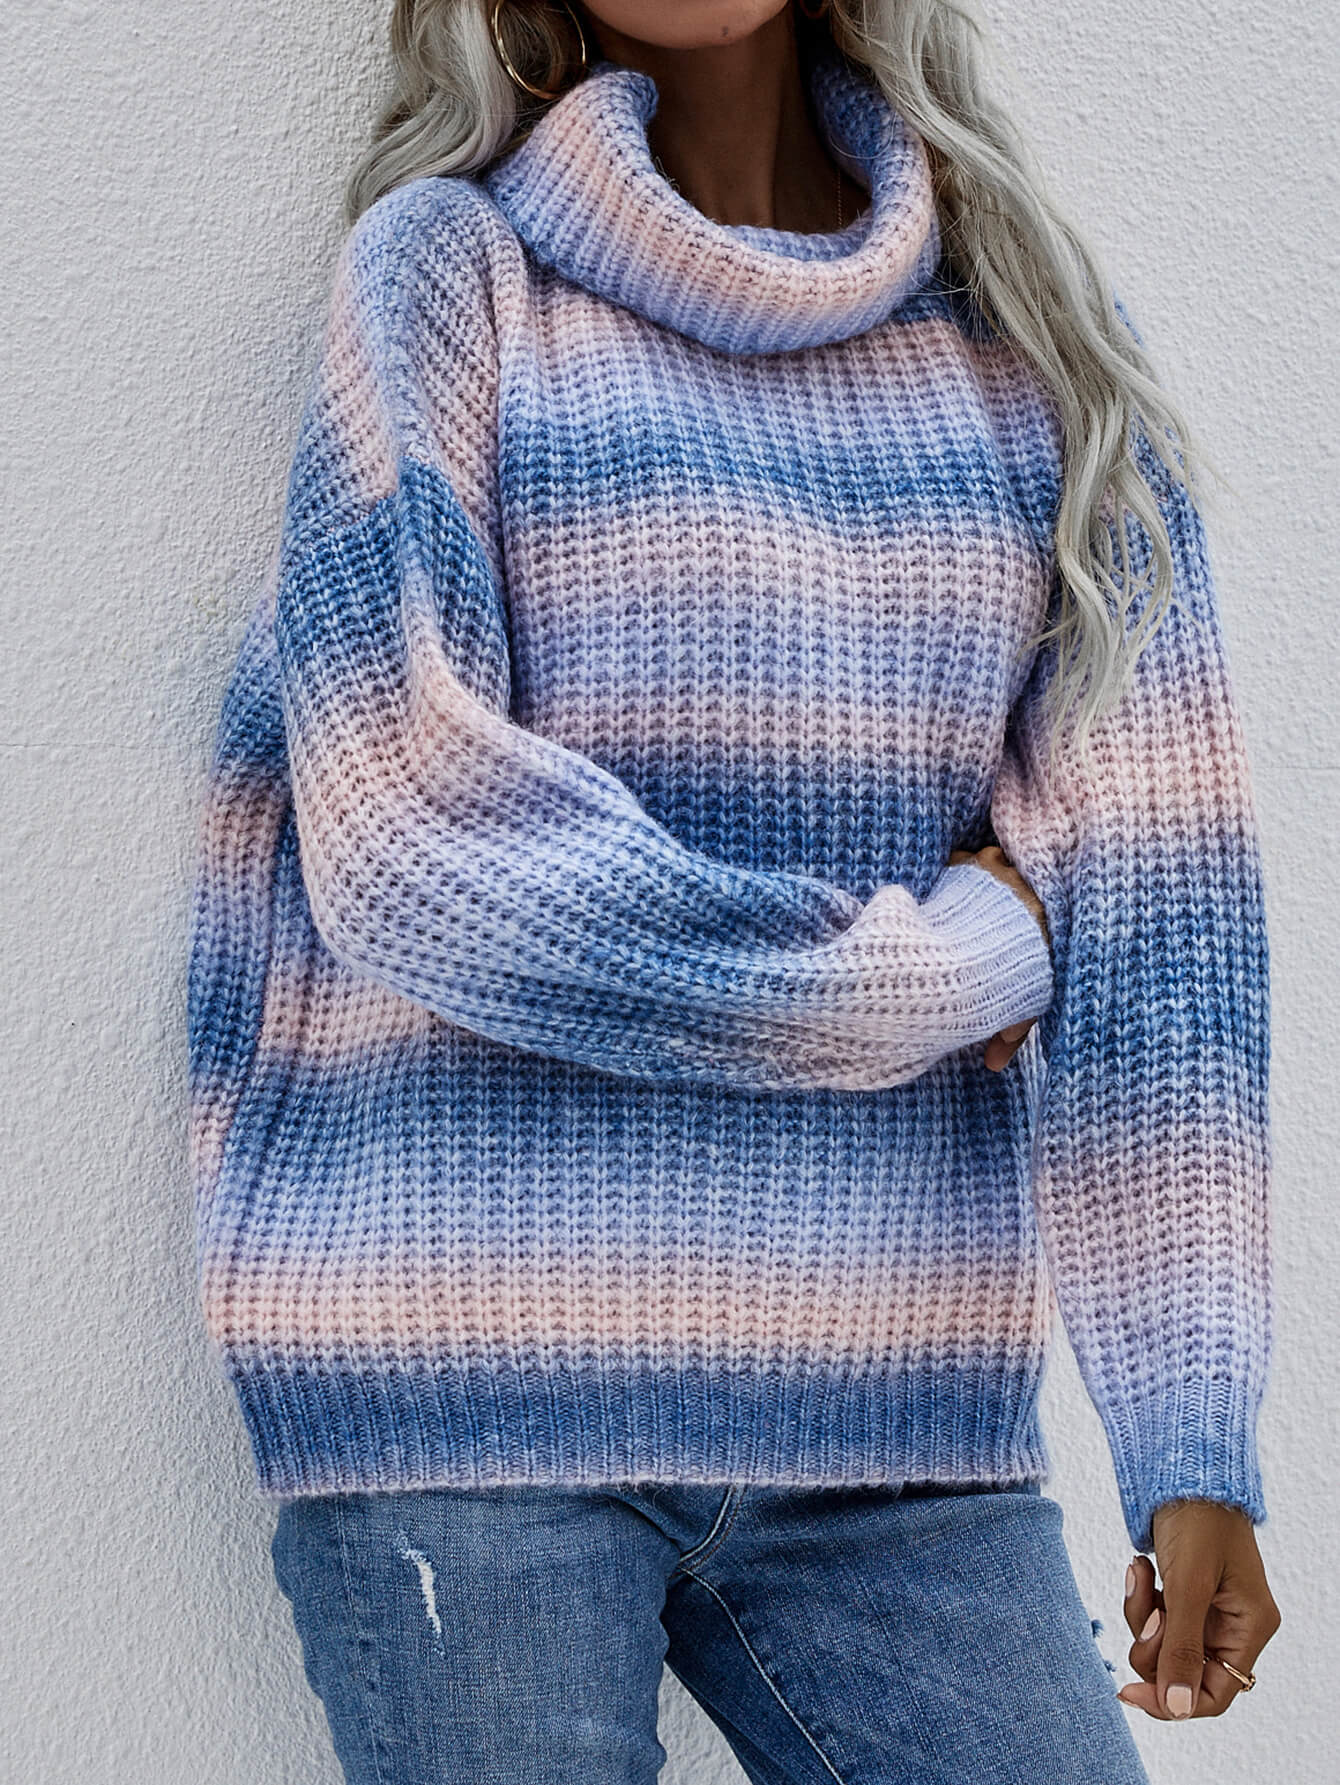 Rainbow Shoulder Sweater | Rib Knit Sweater | Private Label Styles